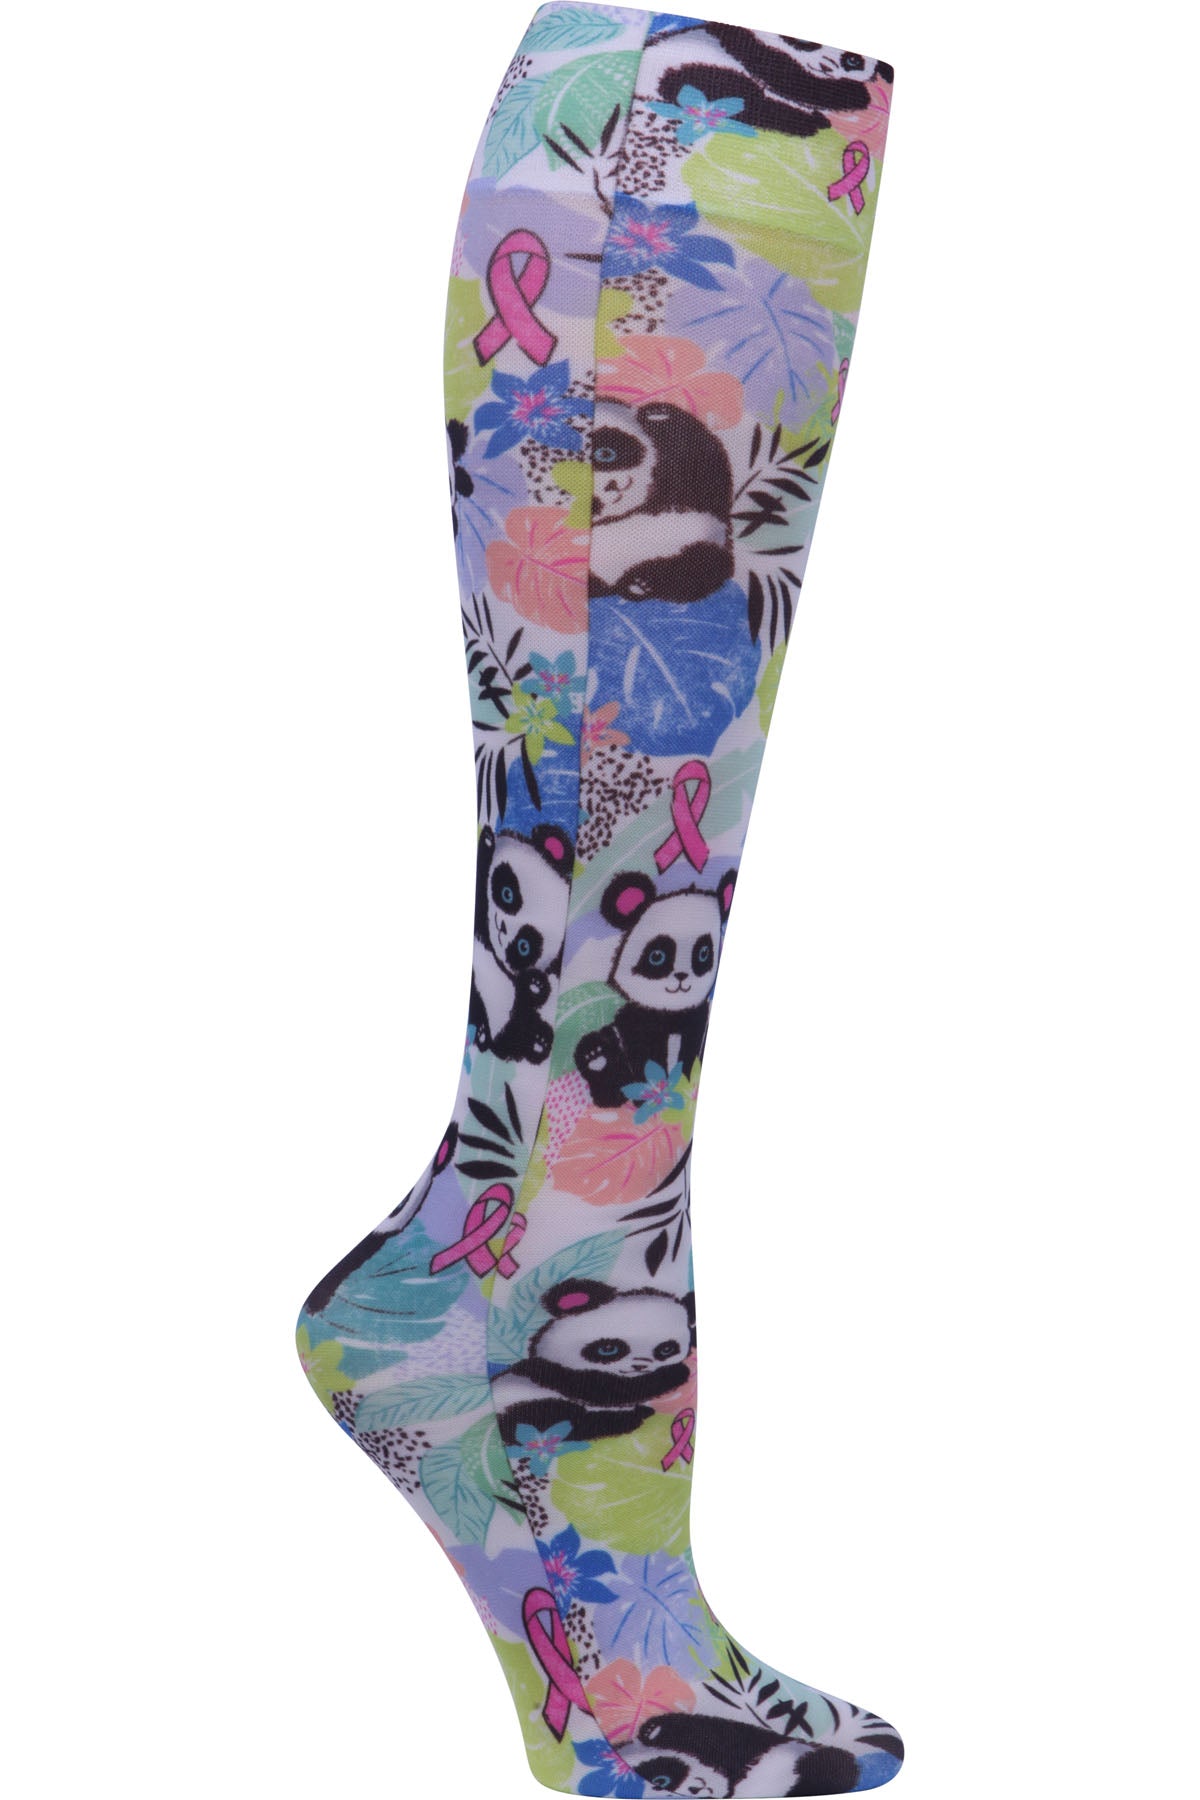 Cherokee Fashion Support Mild Compression Socks 8-15 mmHg Wide Calf Garden Panda-monium at Parker's Clothing and Shoes.